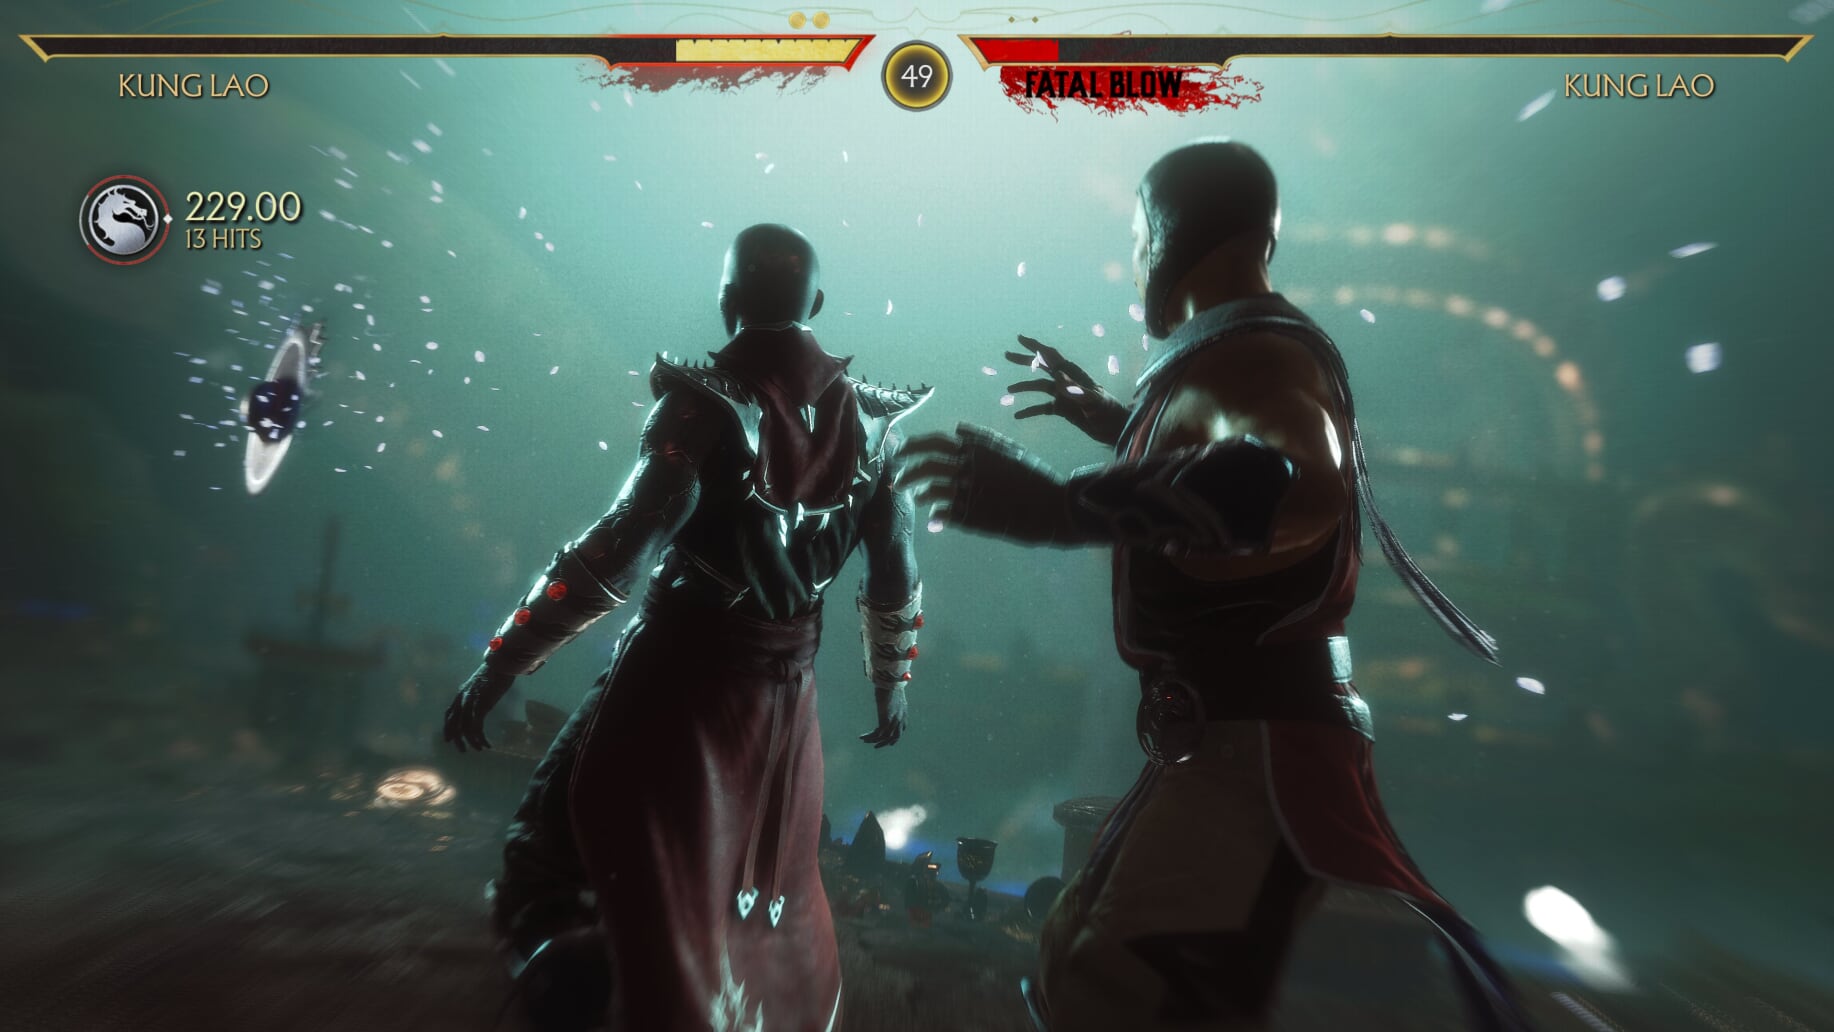 how to get flawless victory in mortal kombat 11｜TikTok Search